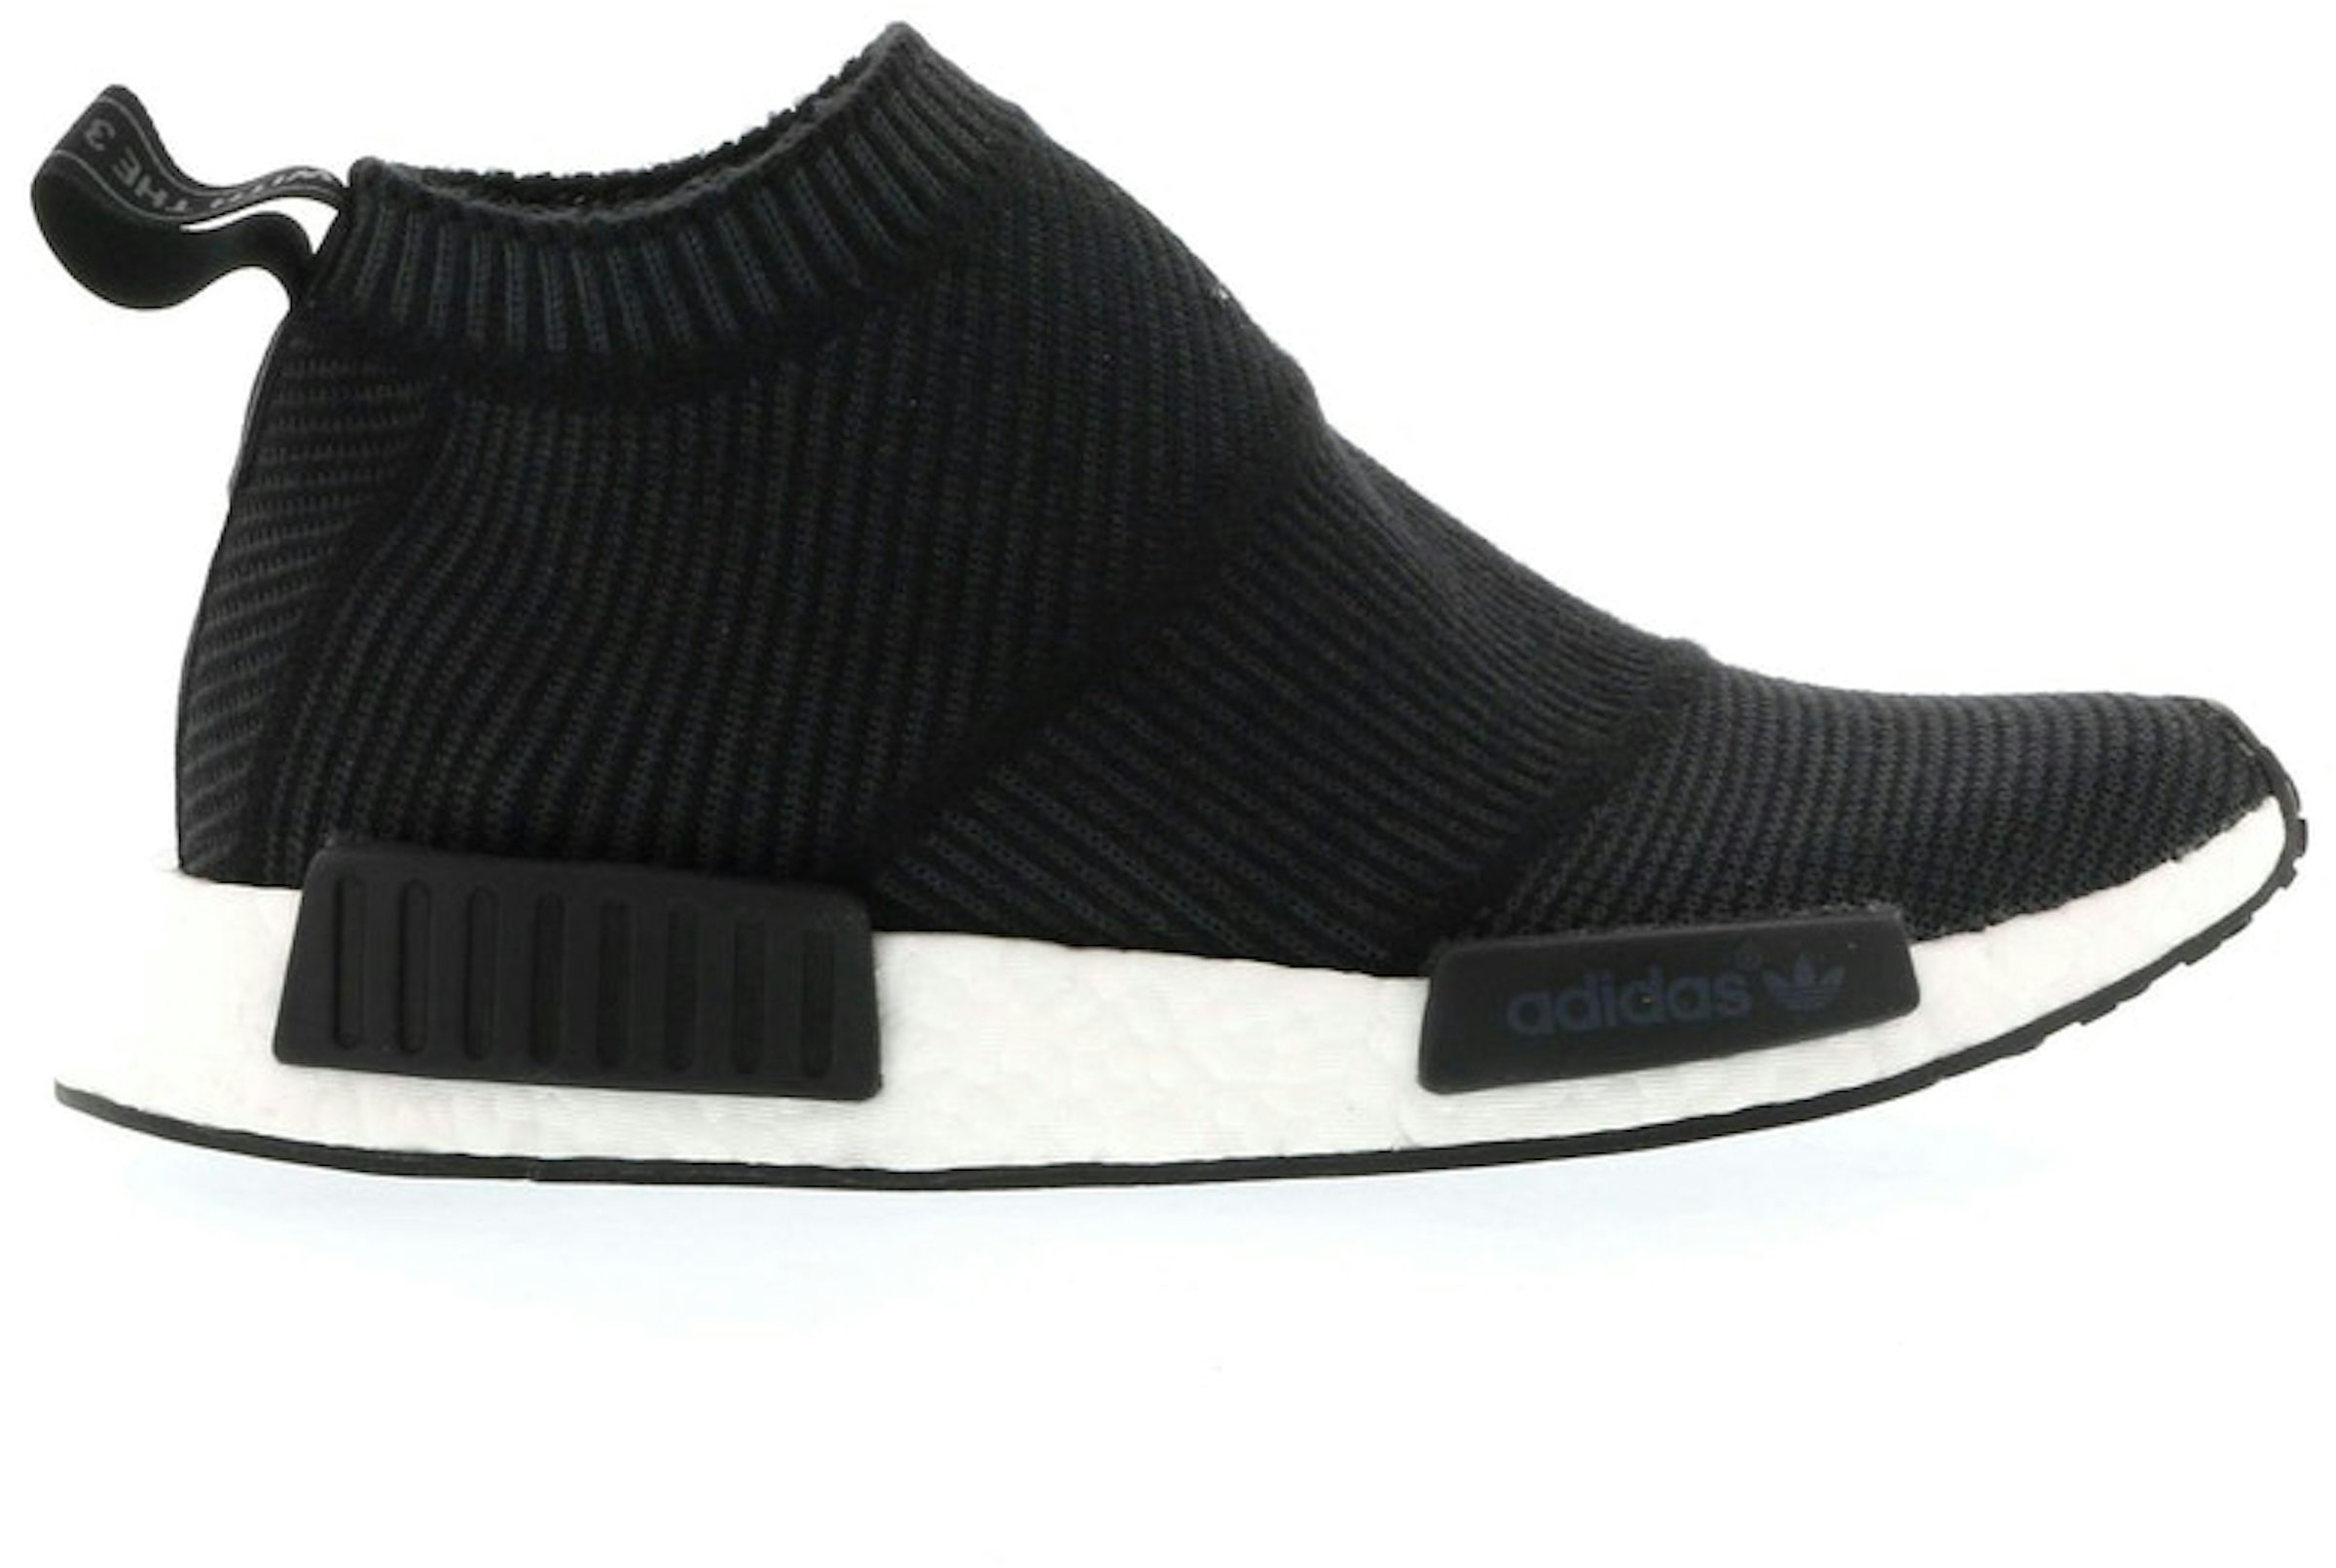 NMD CS1 Shoes & Sneakers - StockX